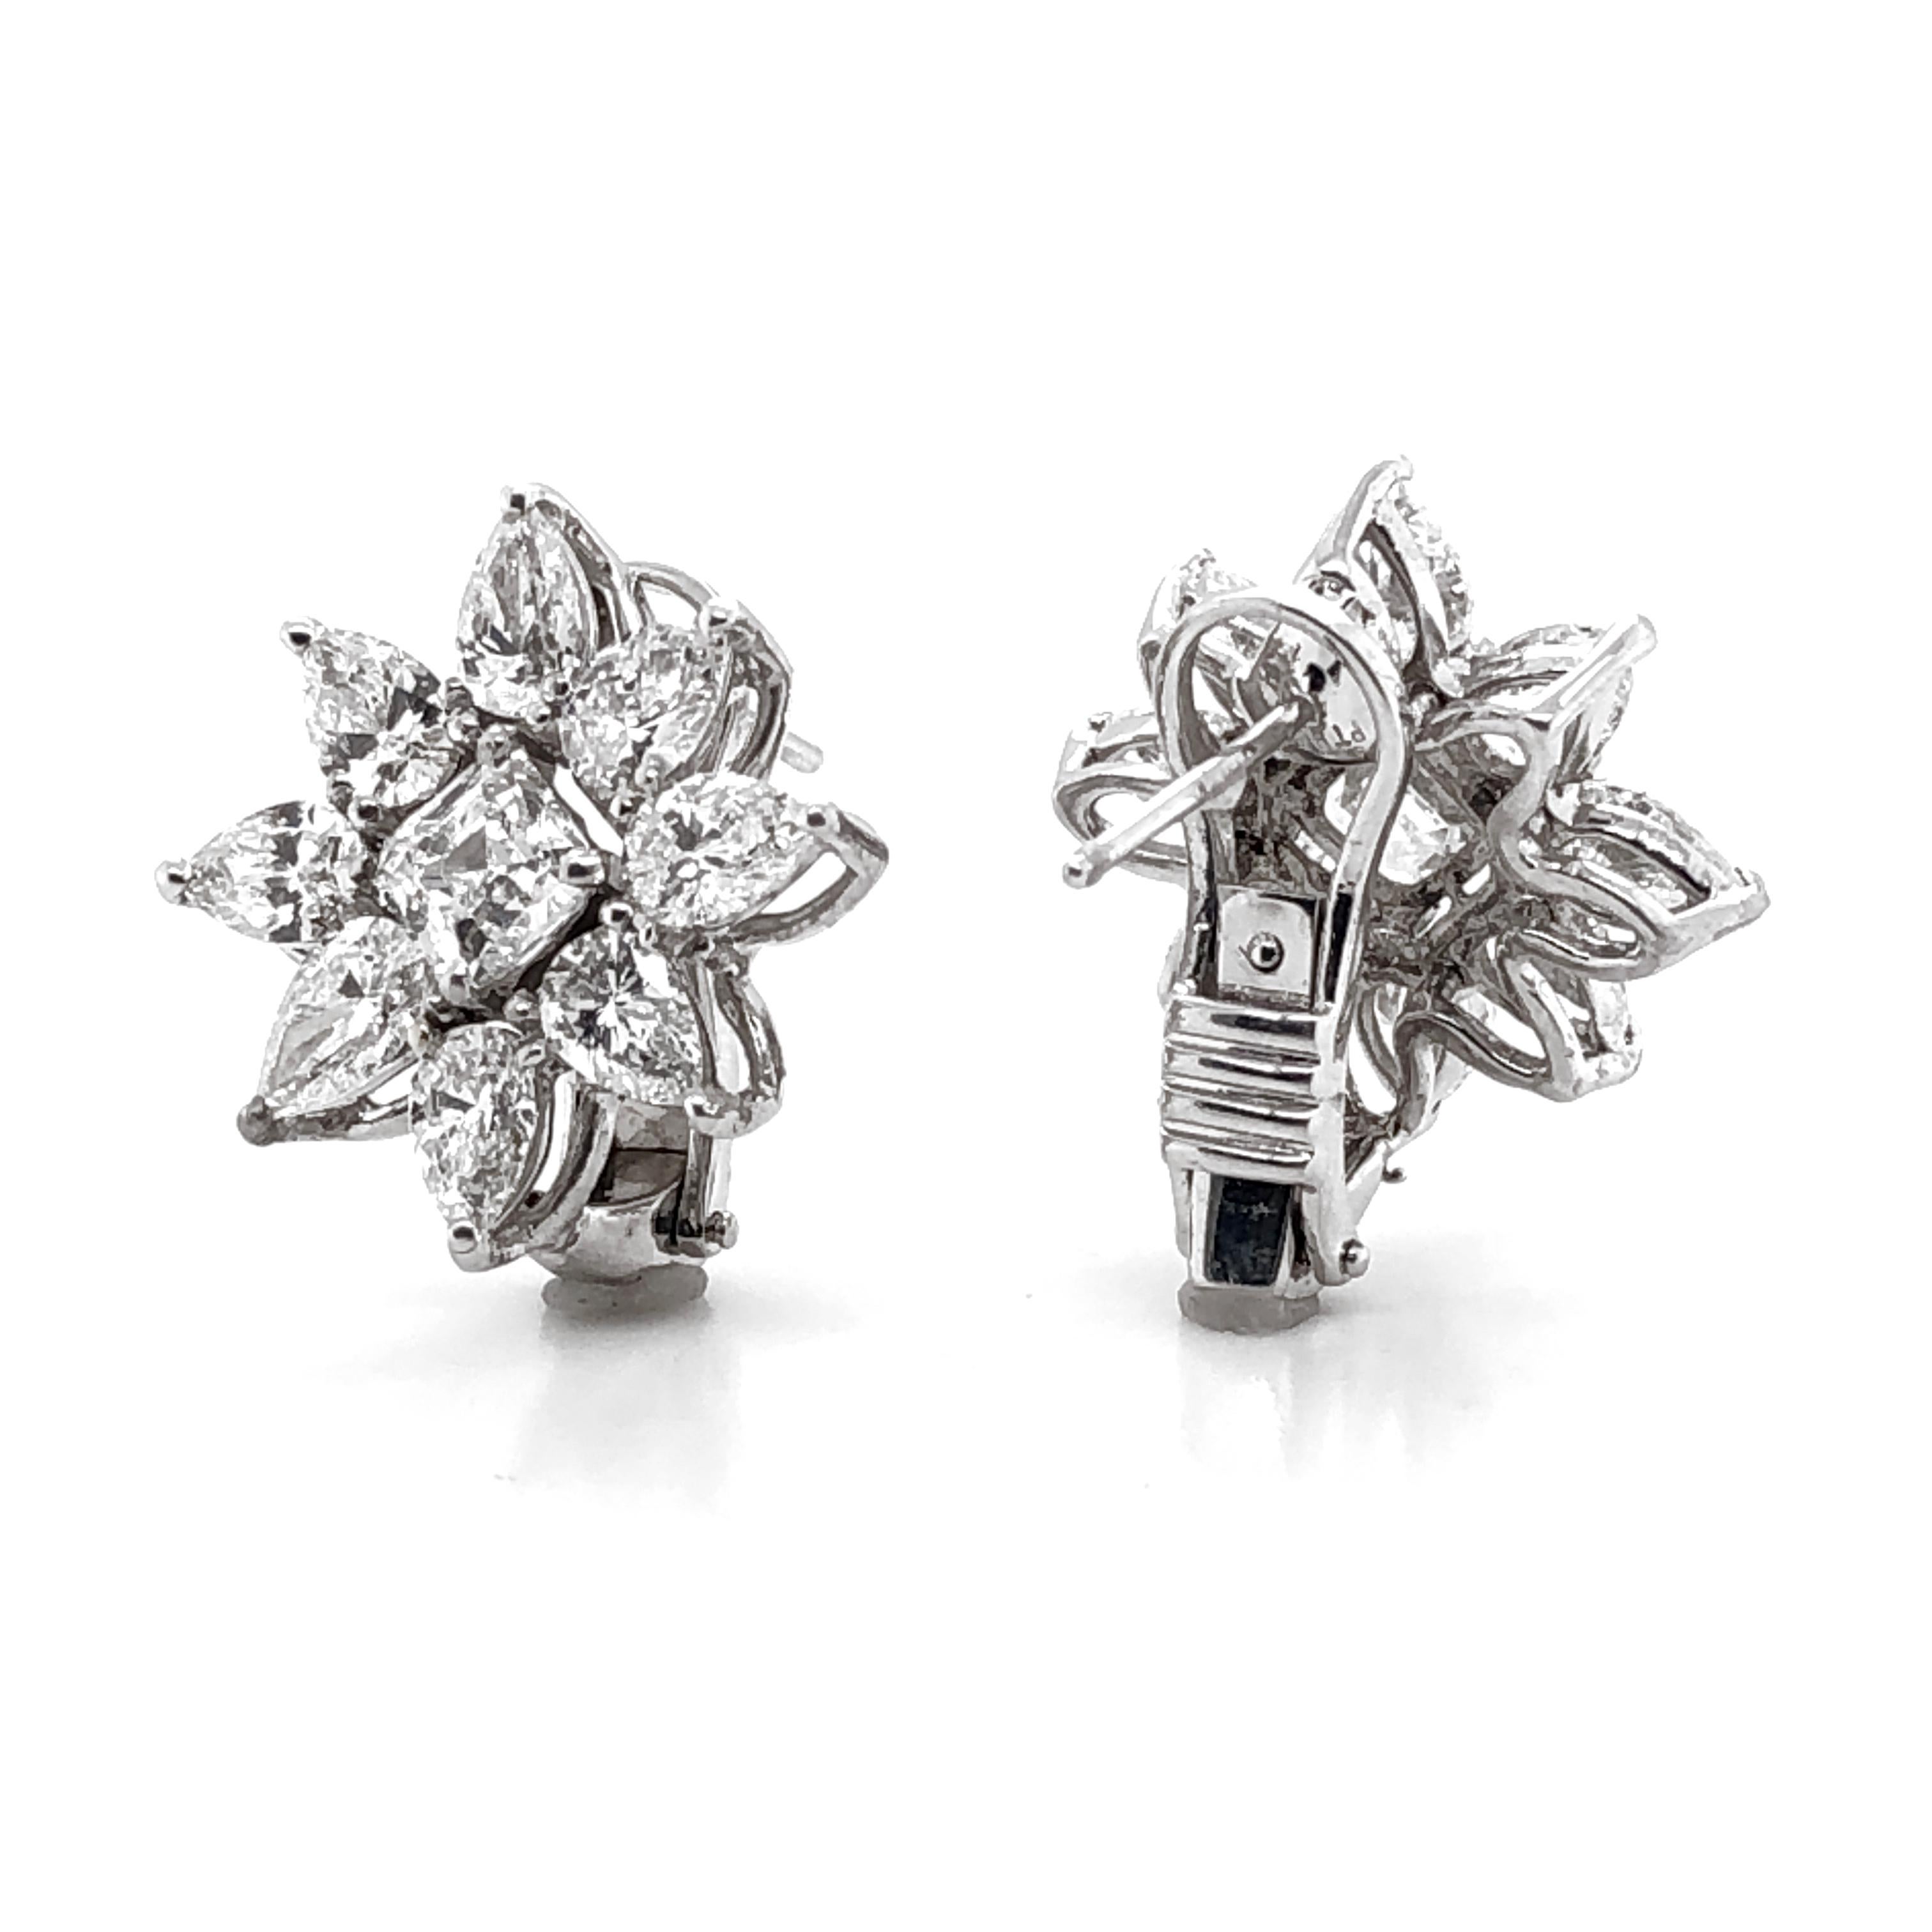 Gorgeous flower inspired contemporary earrings in platinum 950.
Earrings adorned with white natural diamonds.
Center diamonds are GIA certified square emerald cut 1.87 ct.
Accent of pear cut diamonds 4.96 ct. 
All diamonds are in G-H Color Clarity